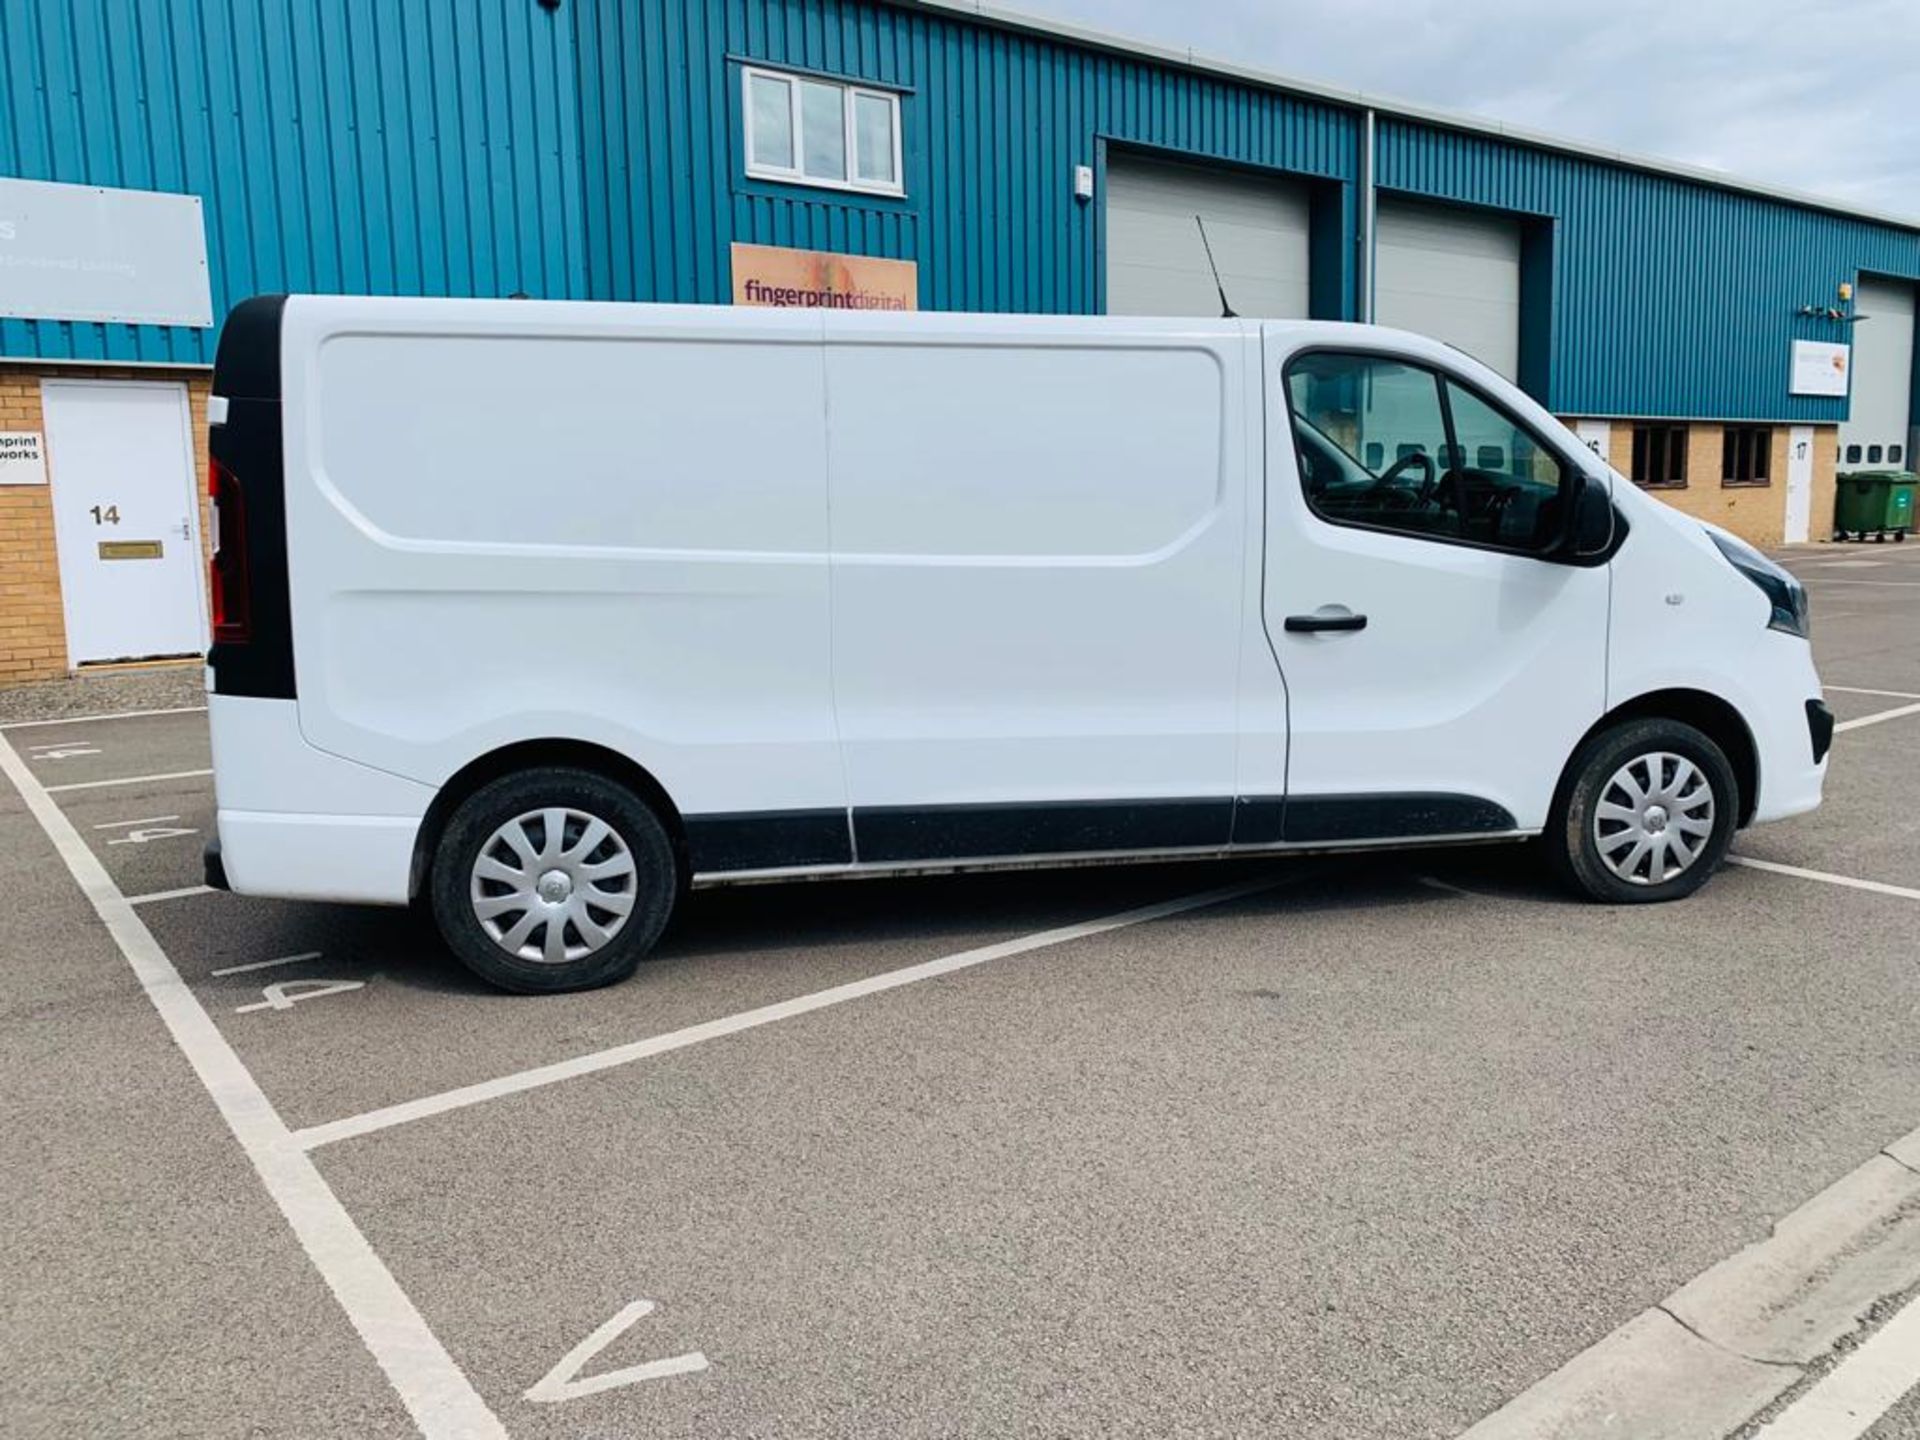 Vauxhall Vivaro 2900 1.6 CDTI Sportive - 2019 Model - 6 Speed - Air Con - Cruise - ONLY 25K Miles - Image 8 of 24